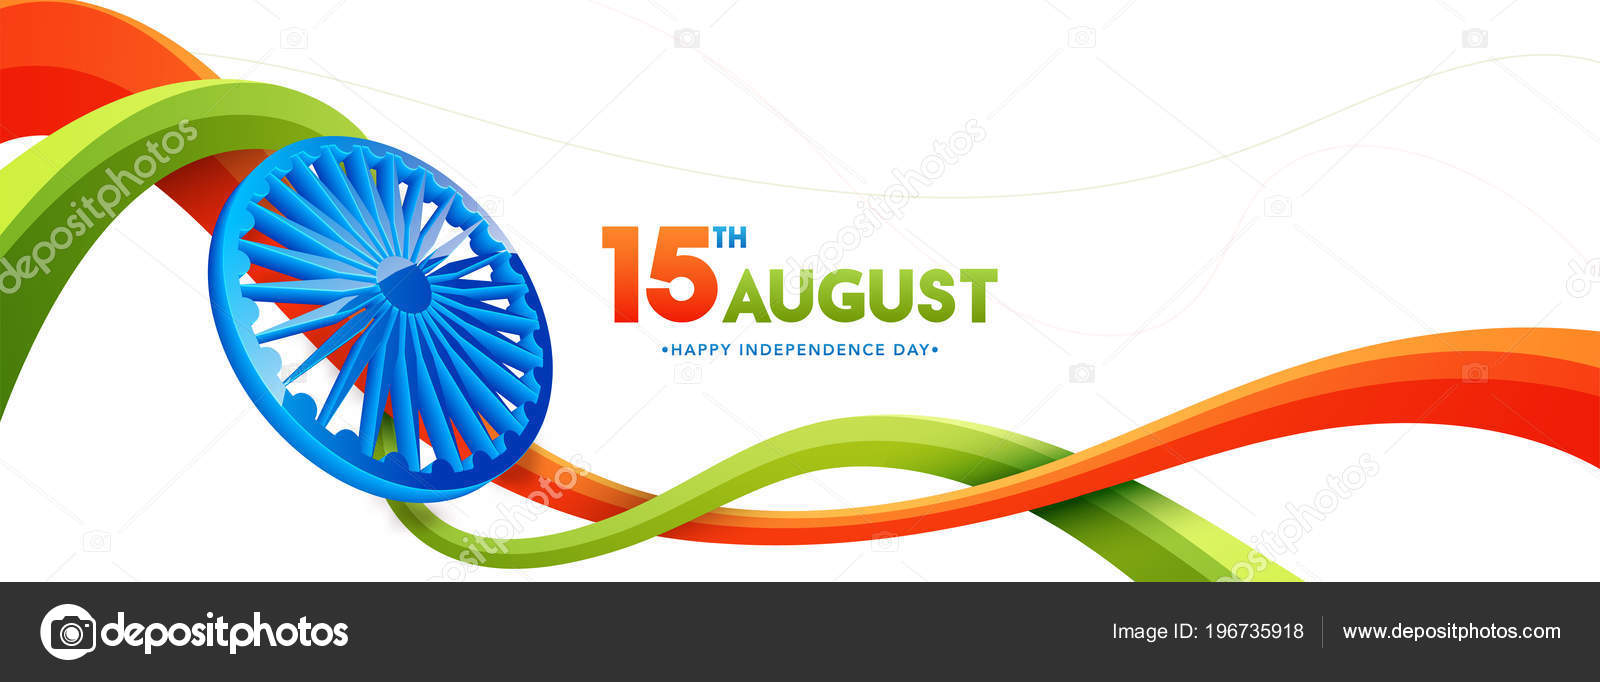 15Th August Indian Independence Day Celebration Web Header Banner ...